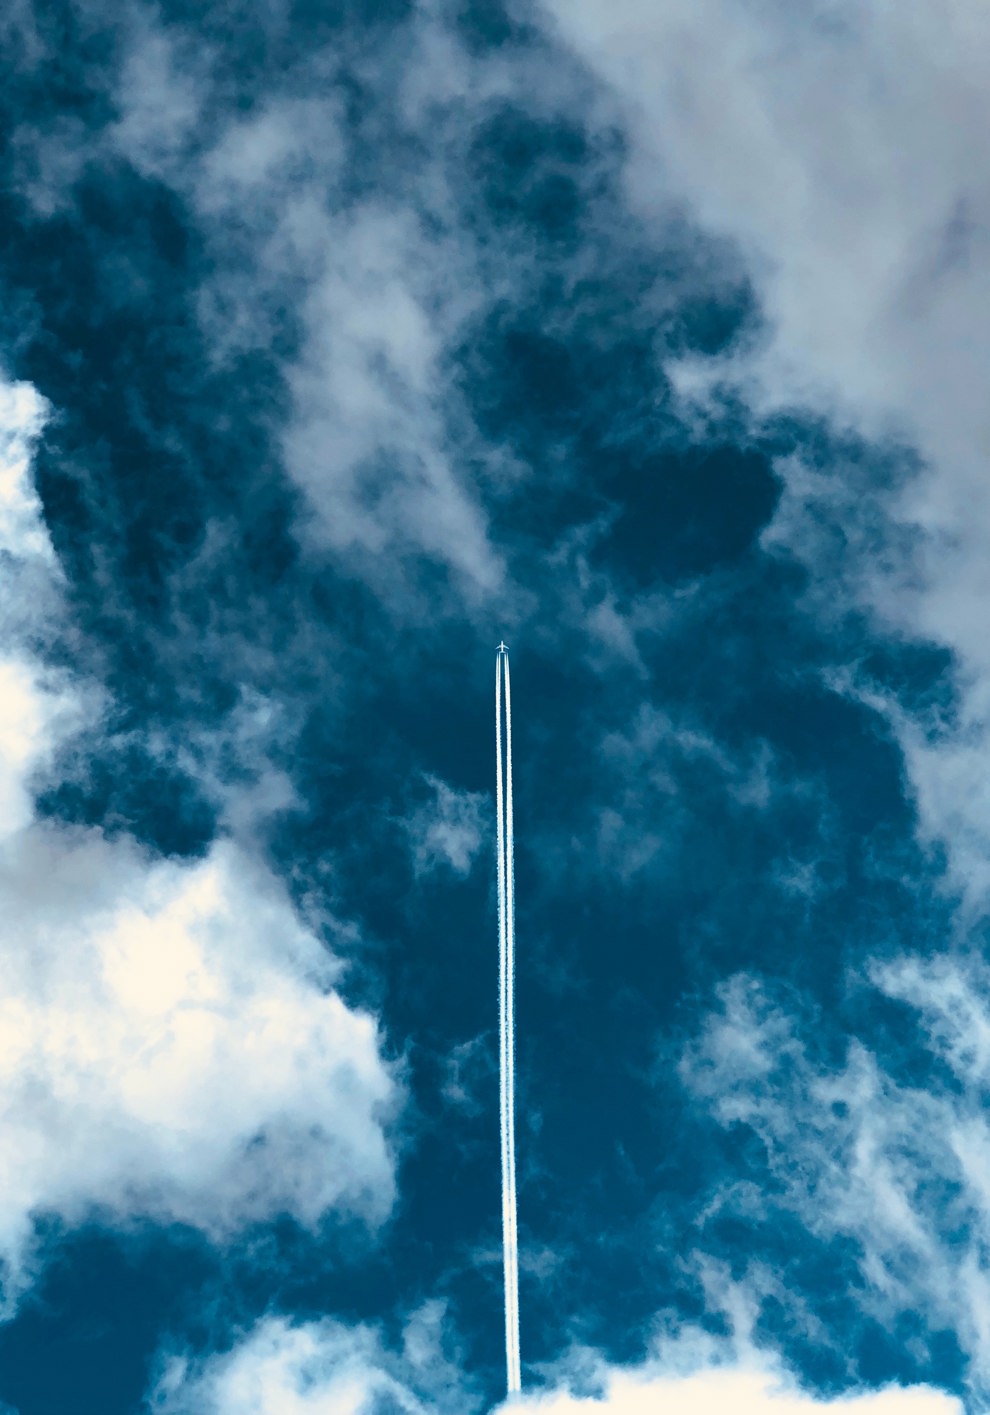 Aviation and carbon markets